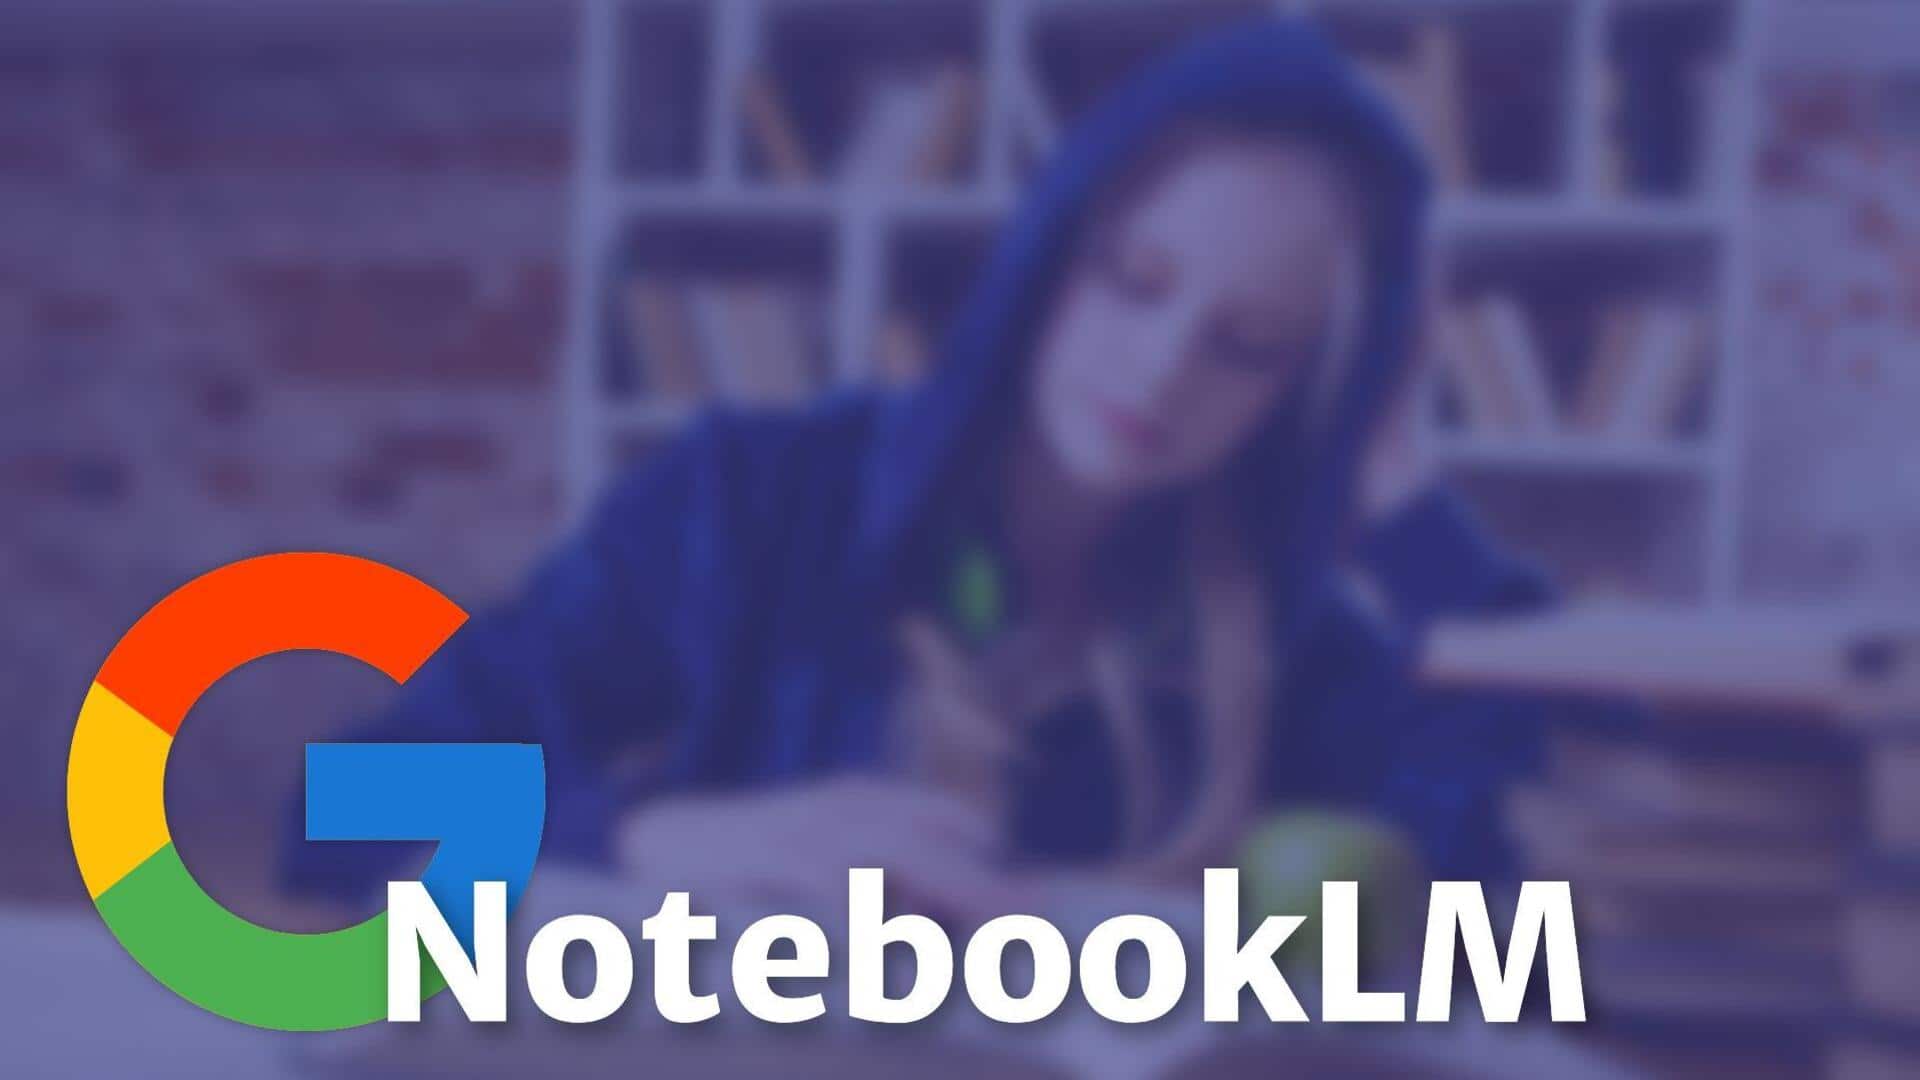 Google's NotebookLM widely available to users: How it works